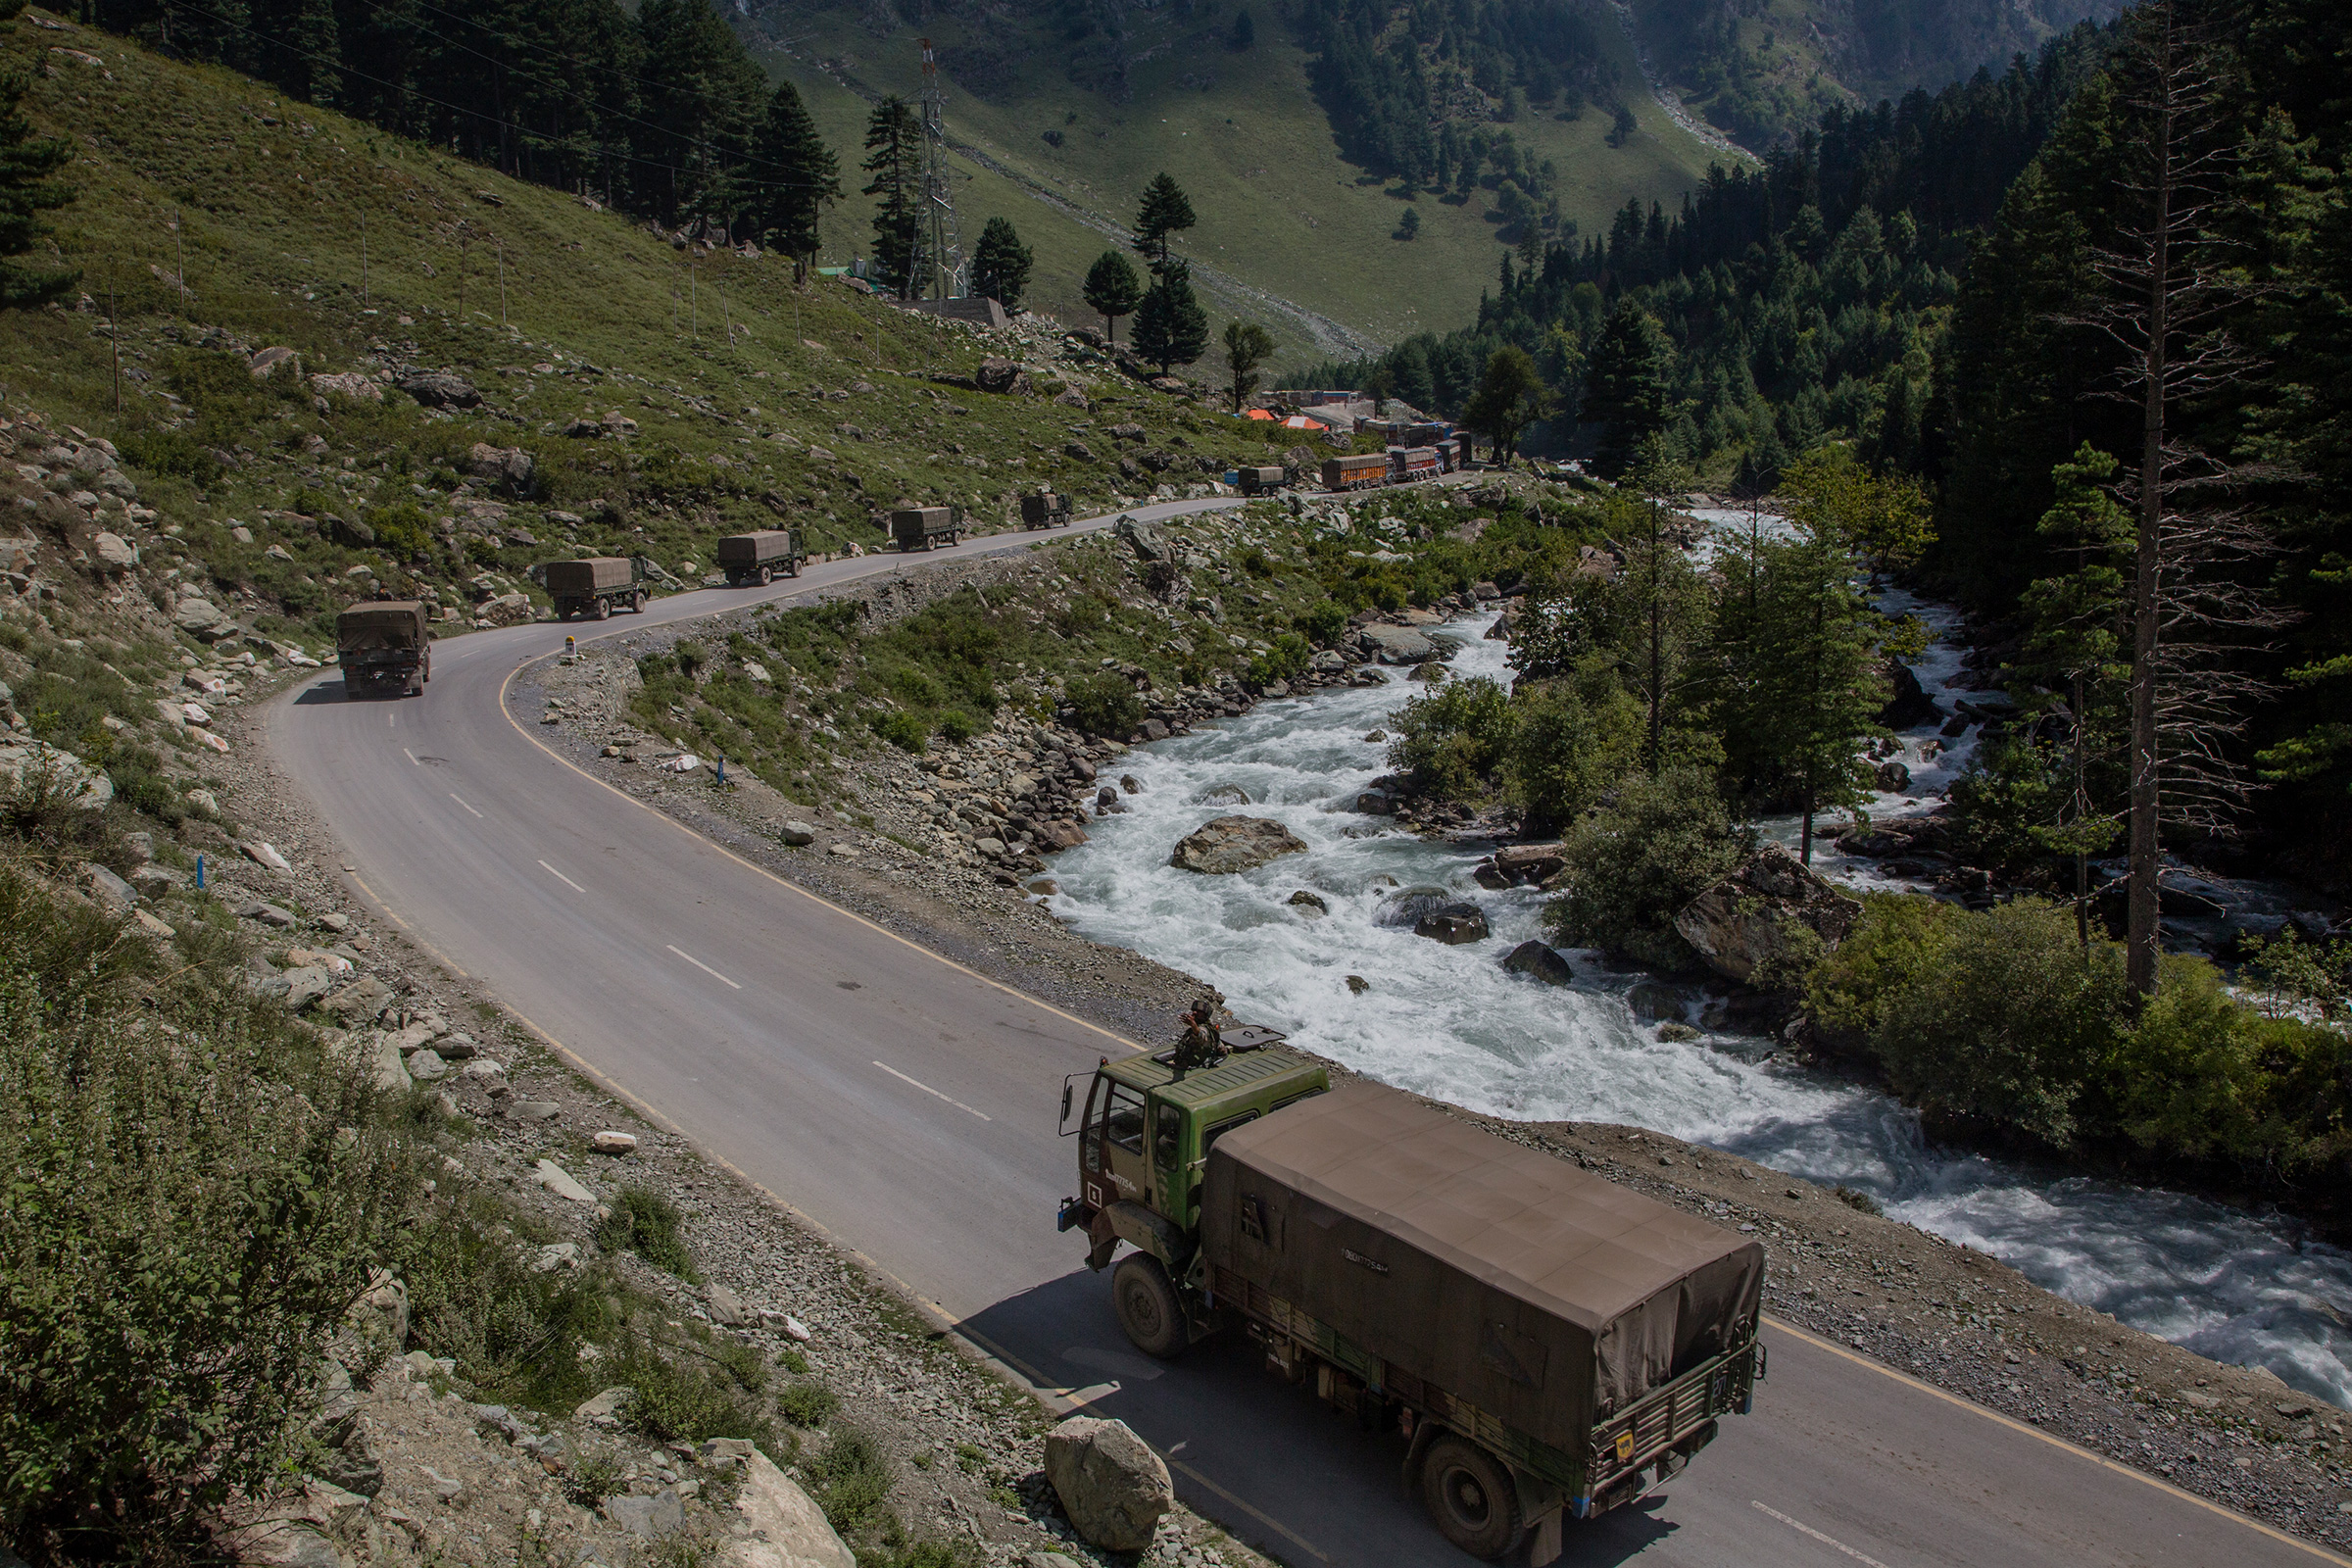 An Indian army convoy drives toward Leh, on a highway bordering China, in Gagangir, India, on Sept. 2. (Yawar Nazir—Getty Images)